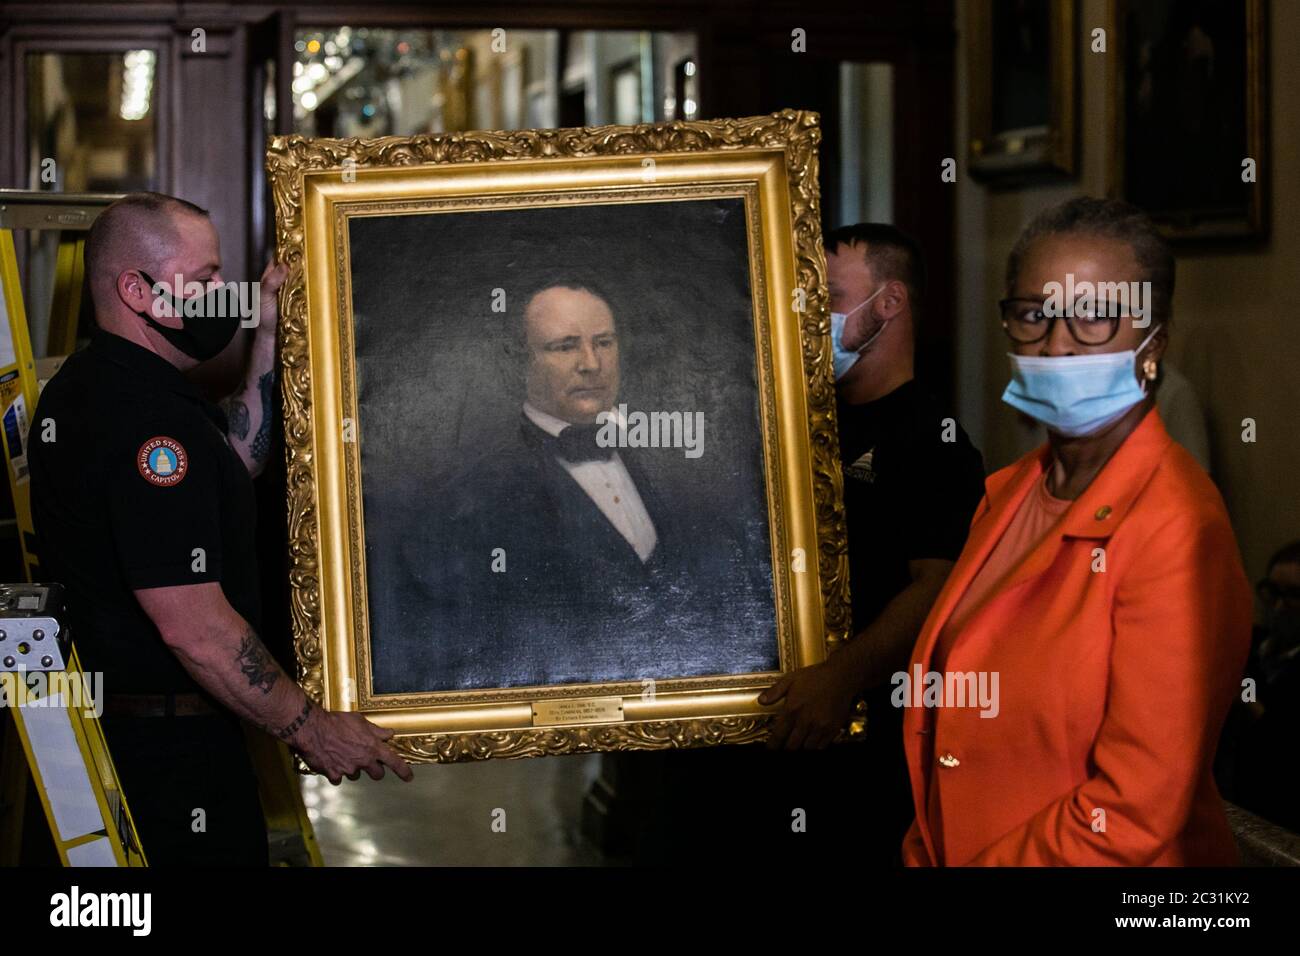 House Clerk Cheryl Johnson looks on as Architect of the Capitol maintenance workers remove a portrait of former Confederate House Speaker James Lawrence Orr, outside of the House Chambers in the US Capitol Building in Washington, DC on Thursday, June 18, 2020. House Speaker Nancy Pelosi ordered the paintings of four House speakers who served in the Confederacy to be removed. The portraits that were removed are of Robert Mercer Taliaferro Hunter of Virginia, Howell Cobb of Georgia, James Lawrence Orr of South Carolina and Charles Frederick Crisp of Georgia. Pool Photo by Nicholas Kamm/UPI Stock Photo